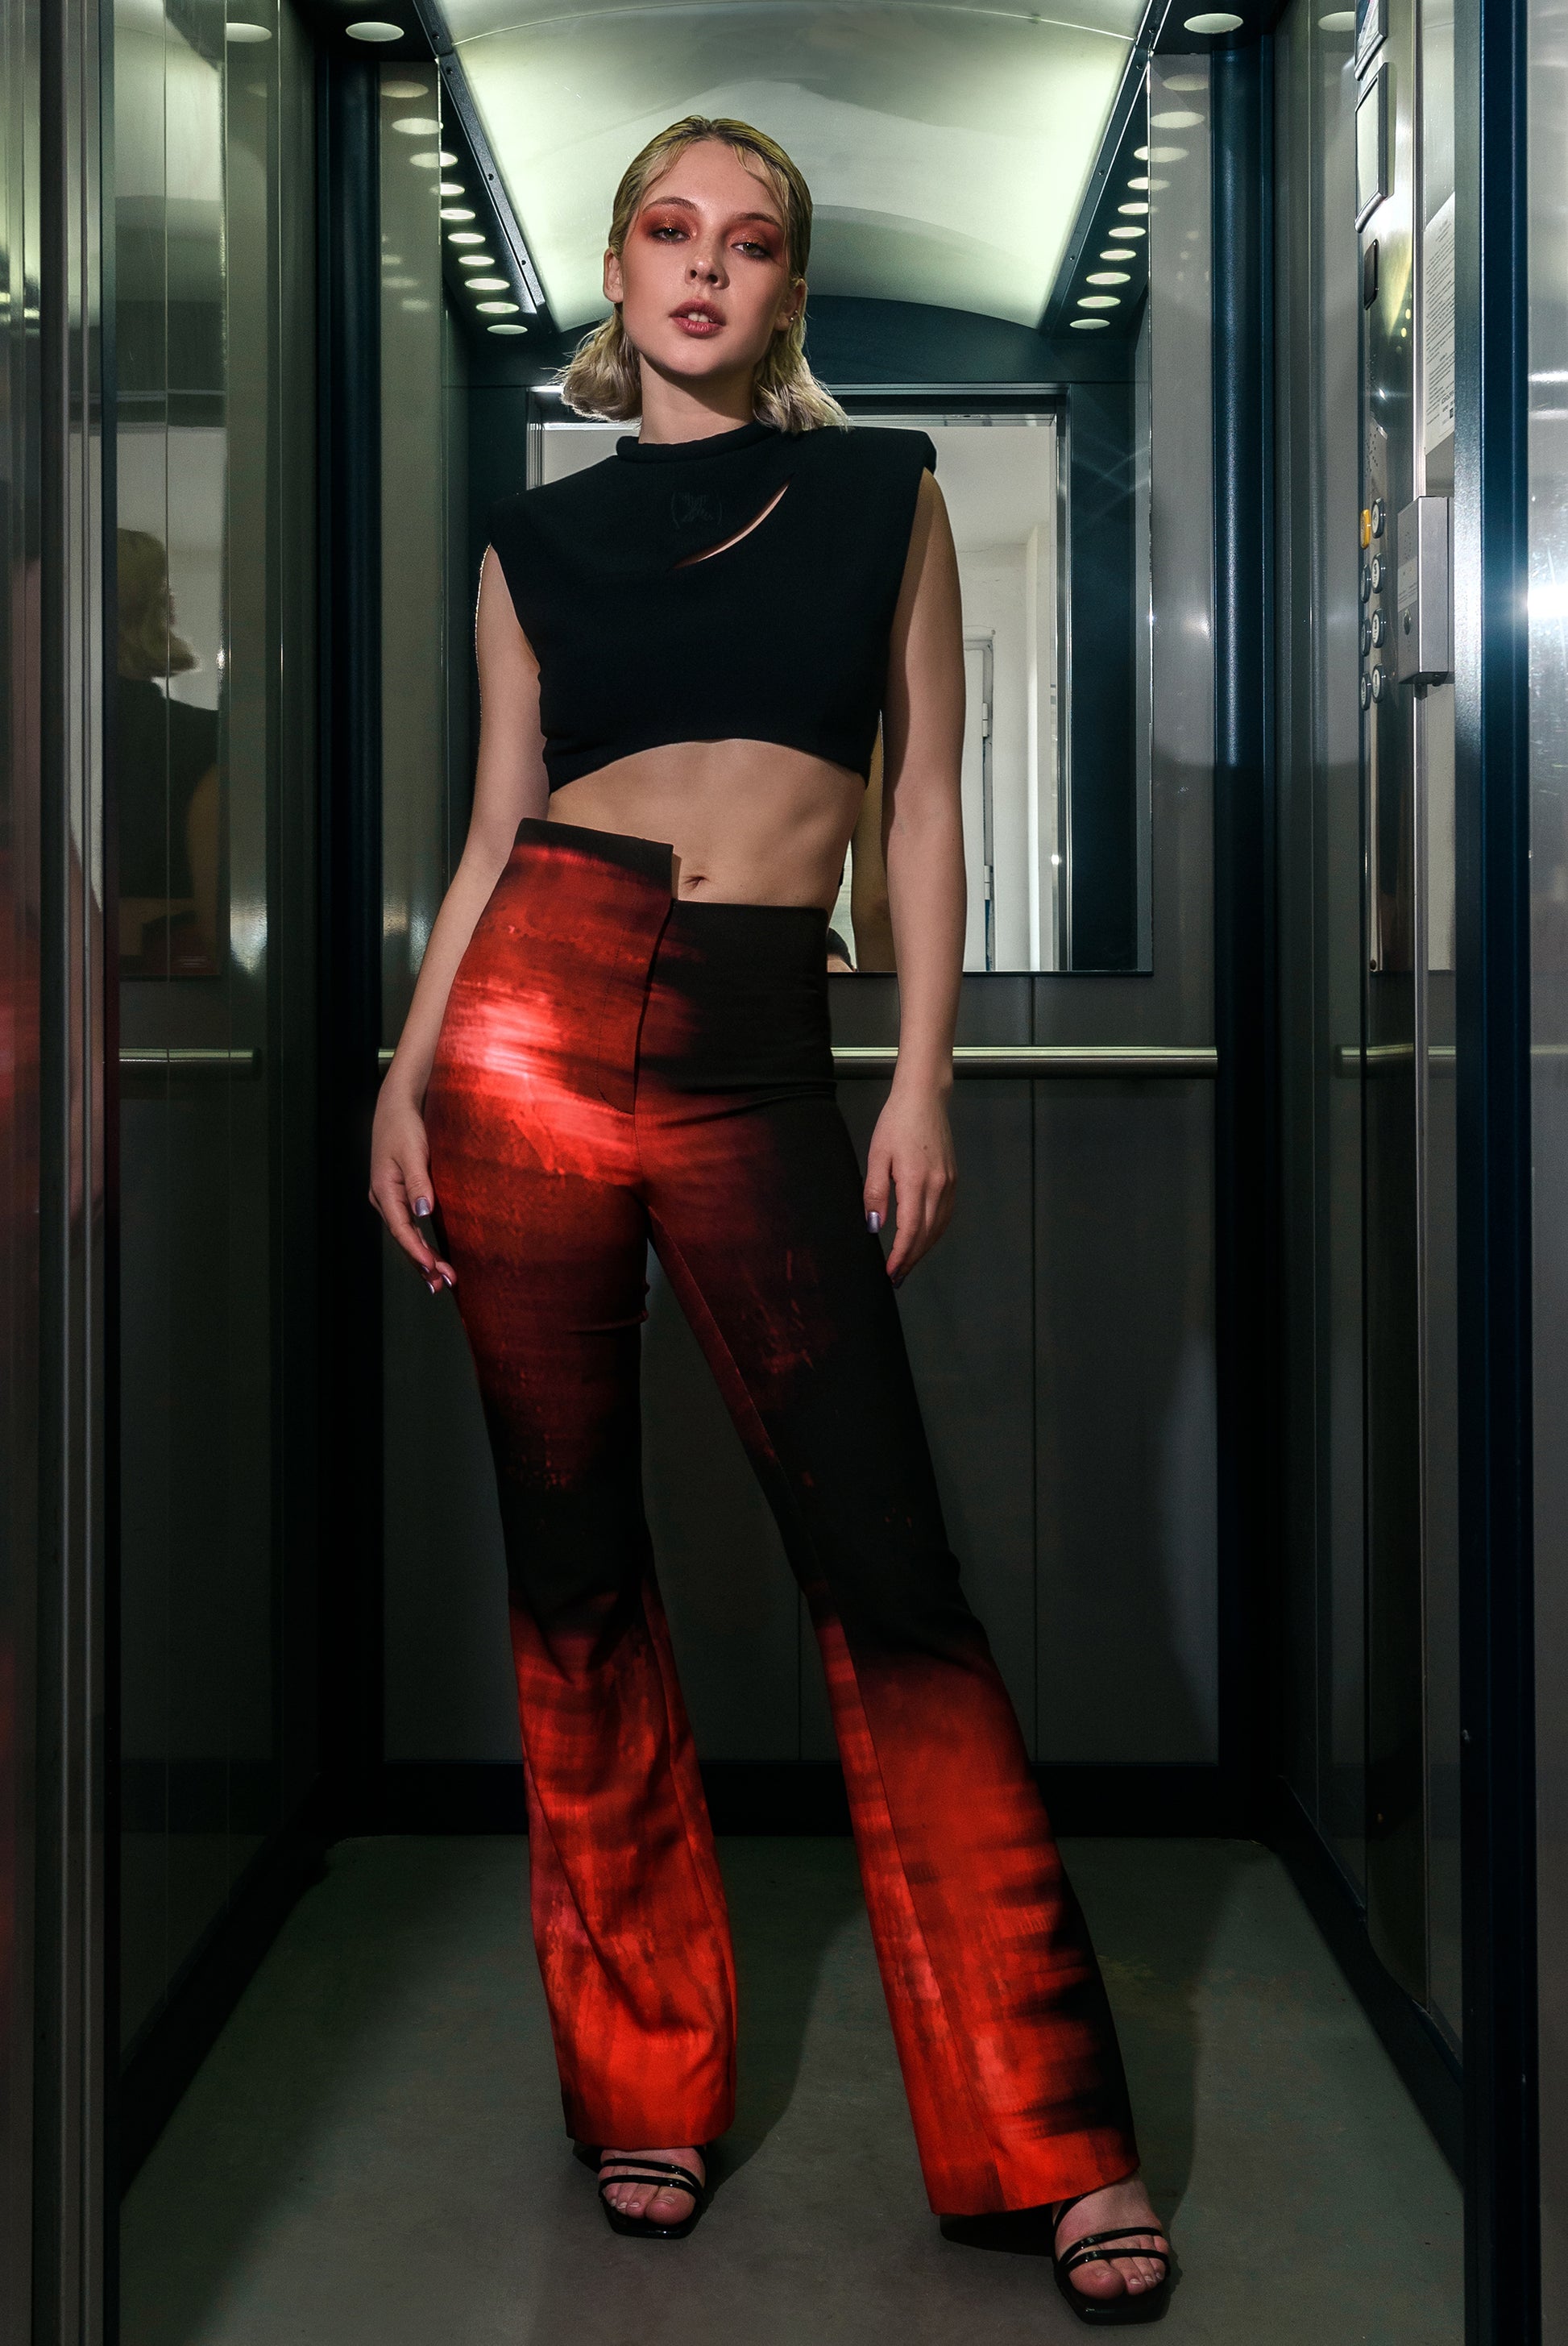 The model wears our cut-out pants with stepping on the waist and print. The outfit also contains our padded crop top with a neck rope and original embroidery. The products create a modern look for a walk around the city or a night out.